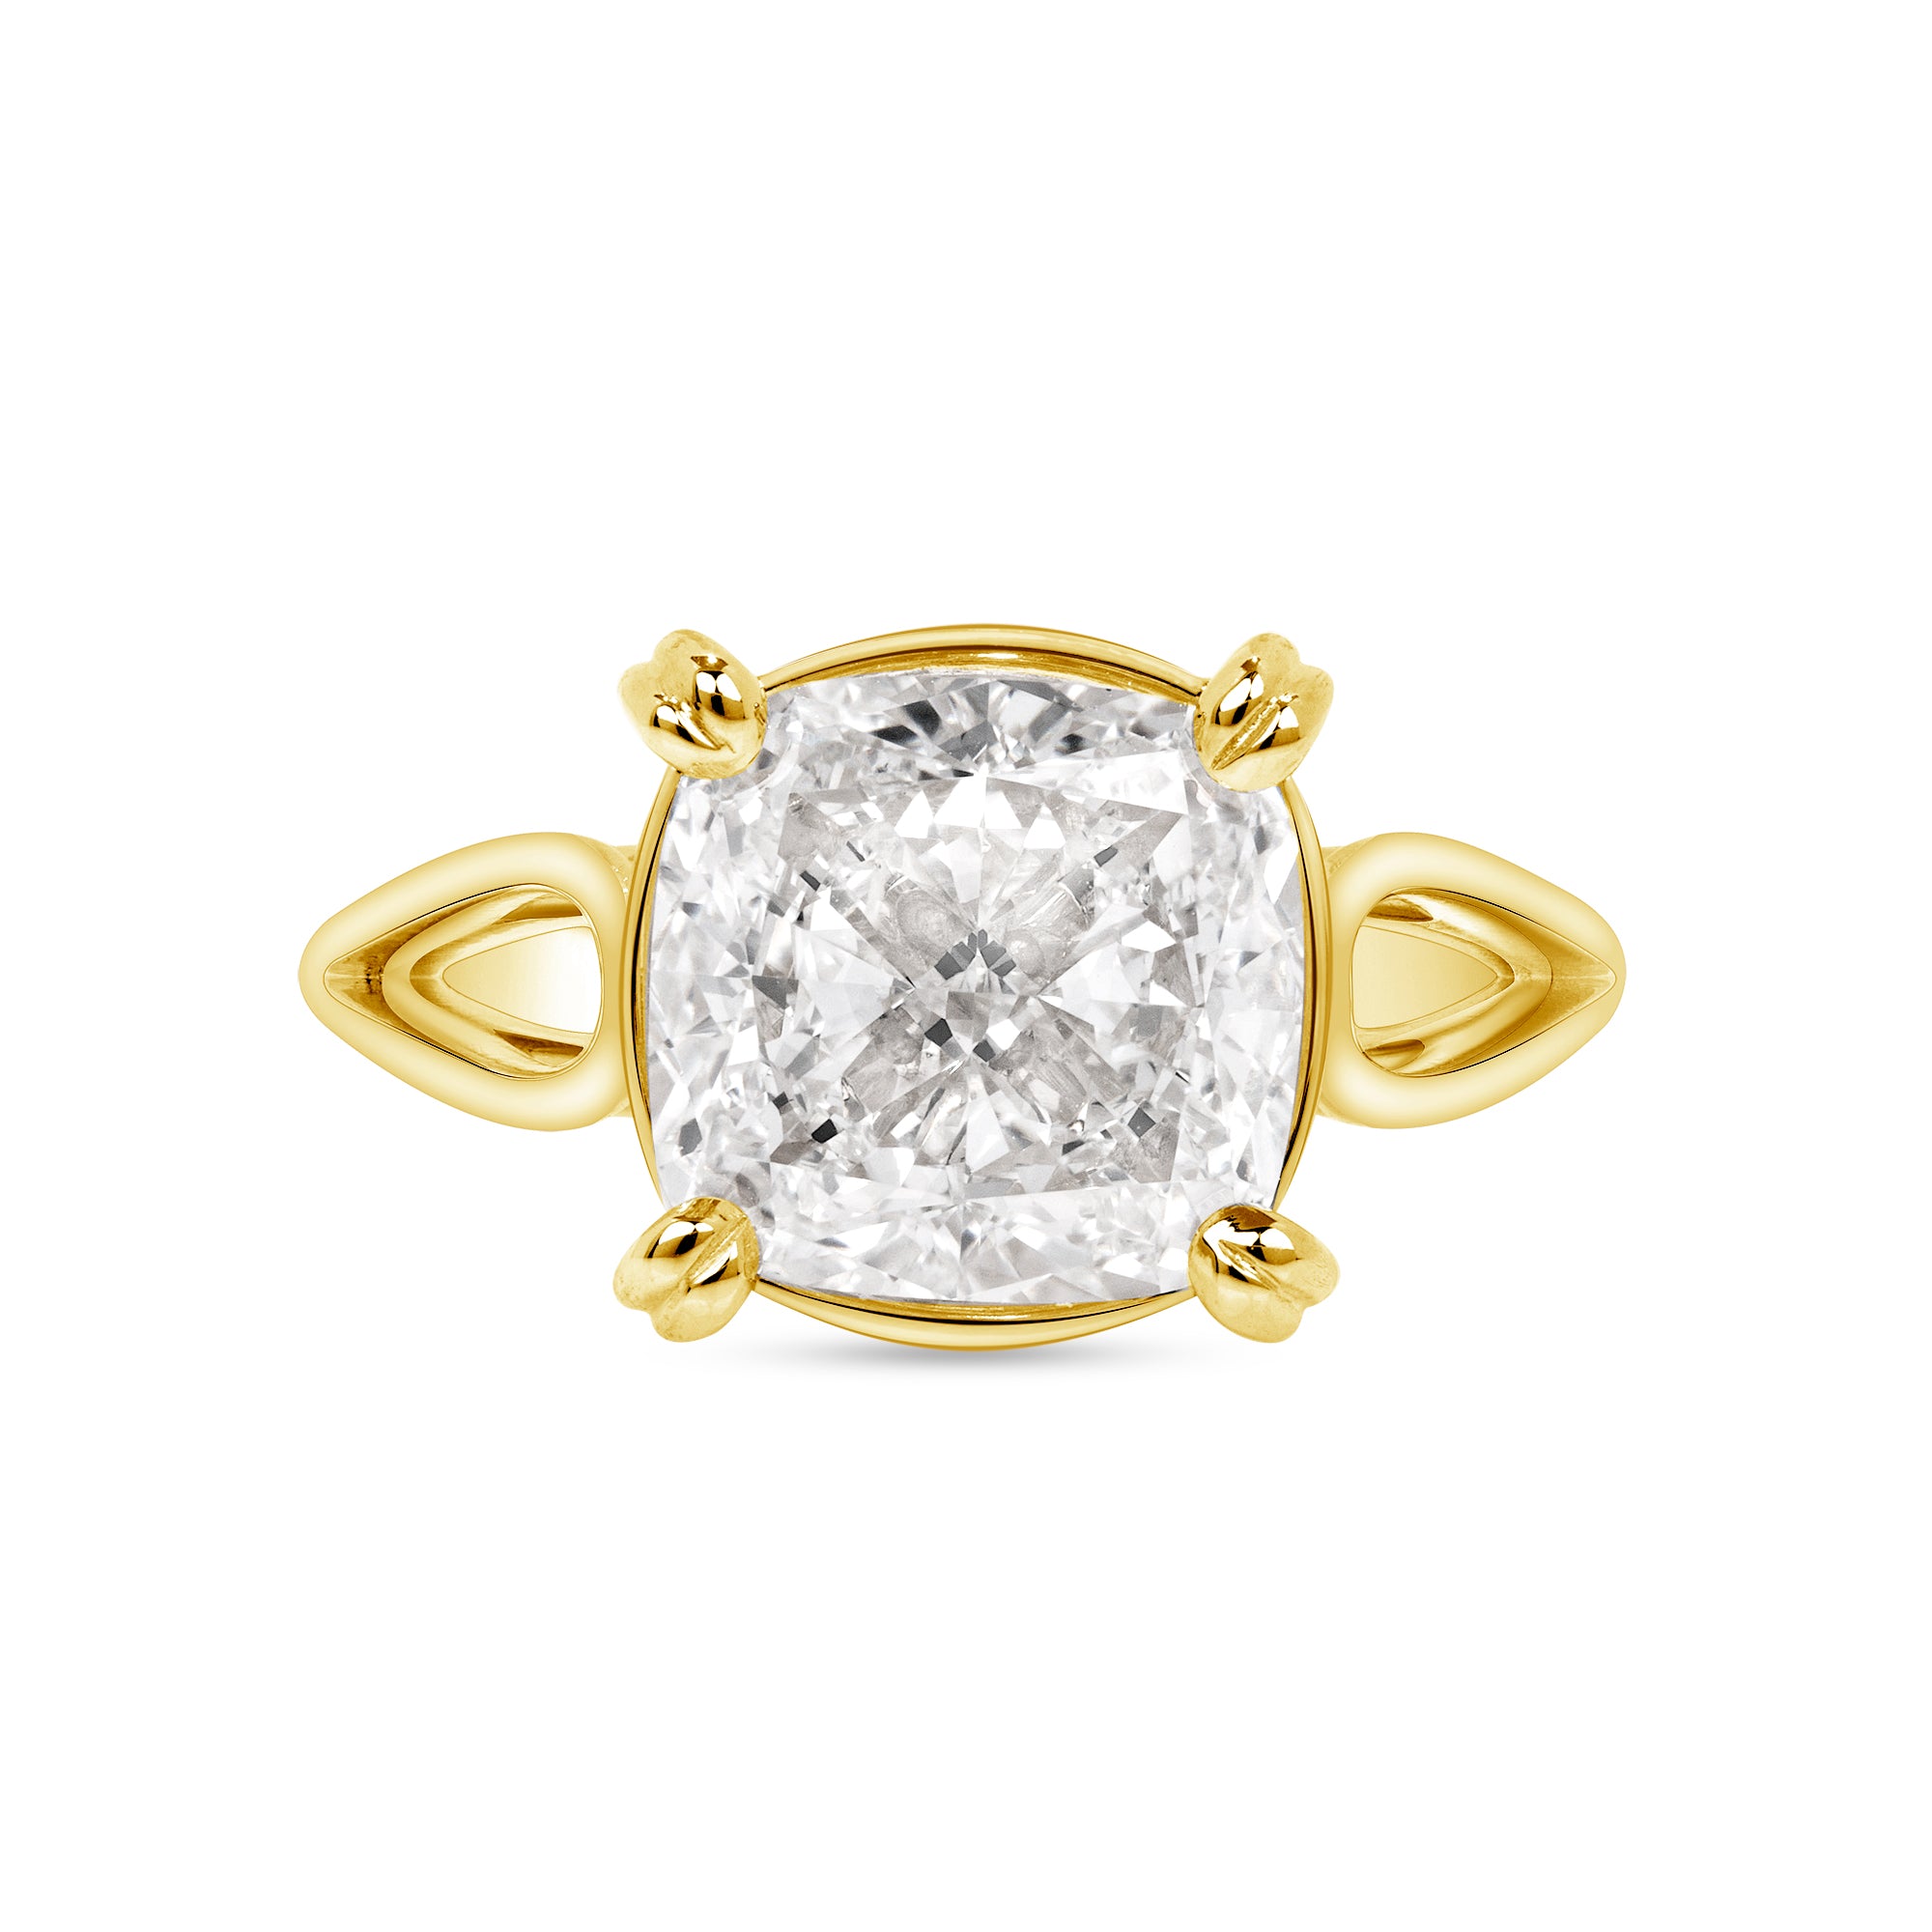 5.02ct Cushion Cut Diamond Solitaire Ring in 18k Yellow Gold Band, GIA Certified